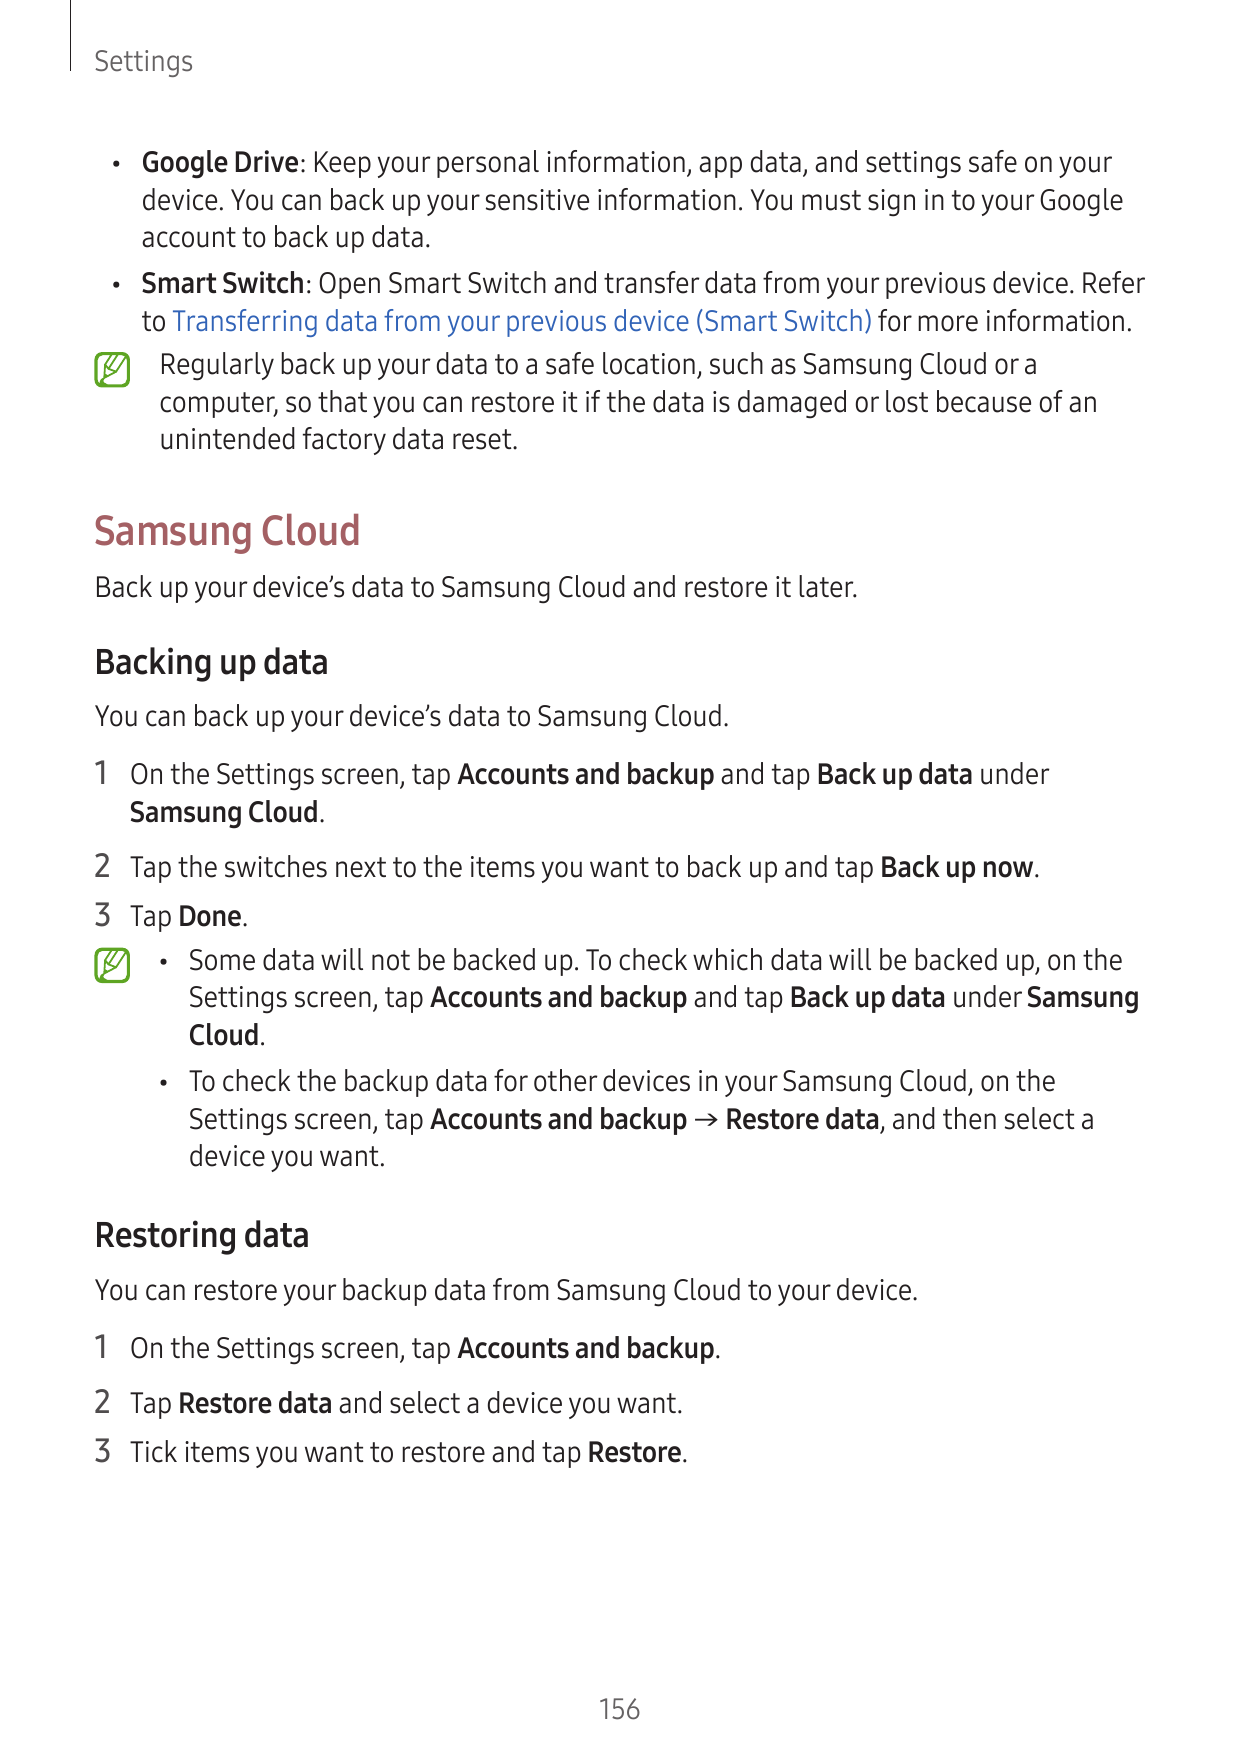 Settings•Google Drive: Keep your personal information, app data, and settings safe on yourdevice. You can back up your sensitive